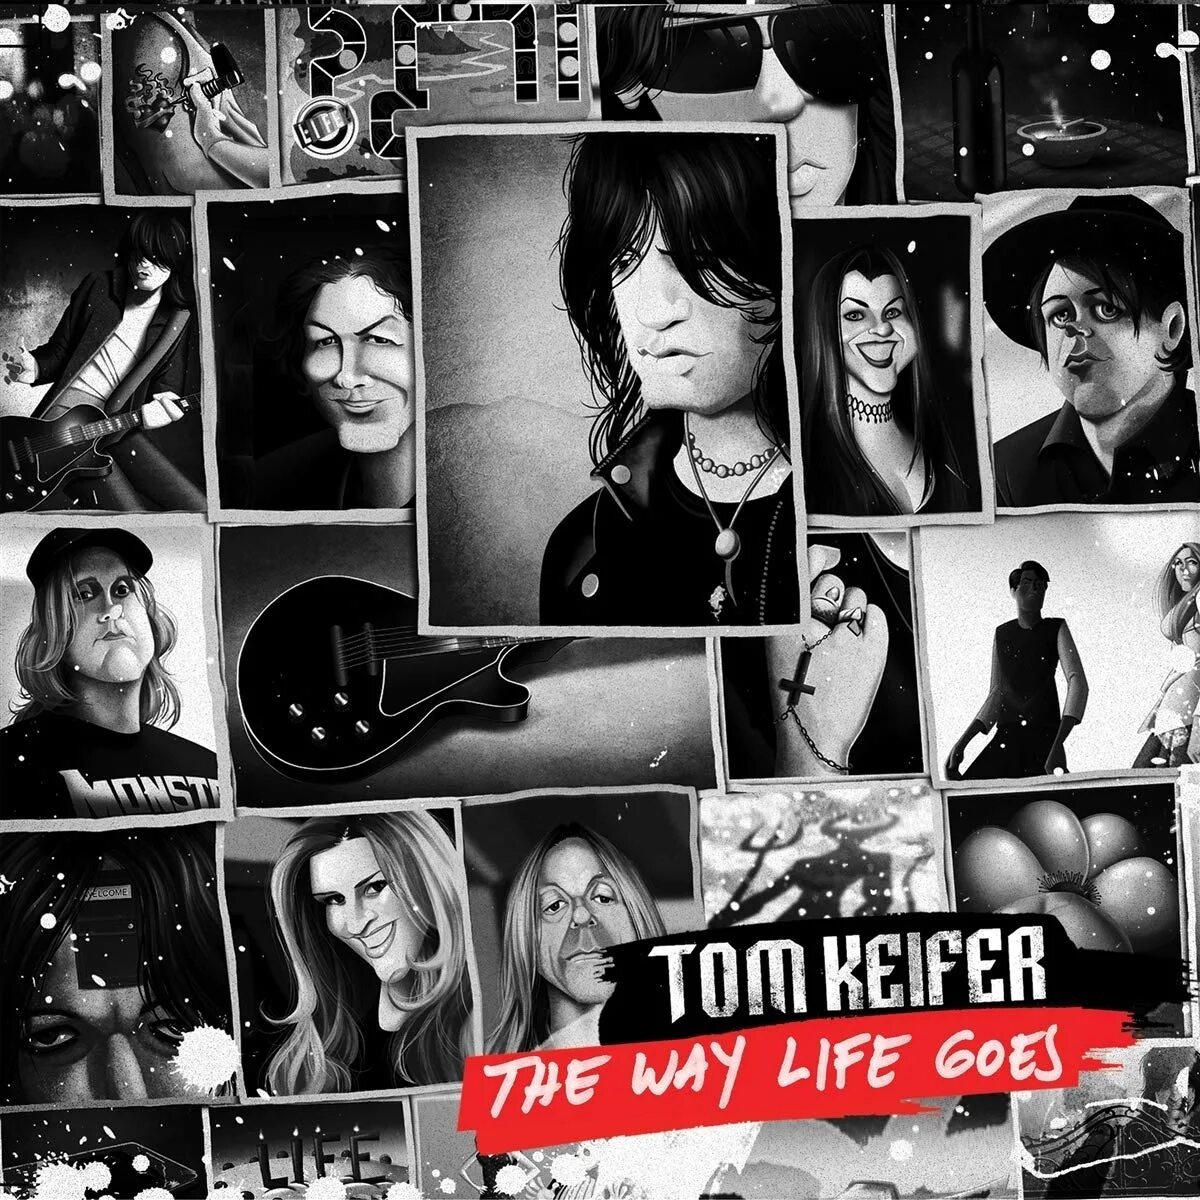 They way life goes. The way Life goes - Deluxe Edition Tom Keifer. The way Life goes том Кейфер. Tom Keifer the way Life goes 2013. Tom Keifer Rise 2019.